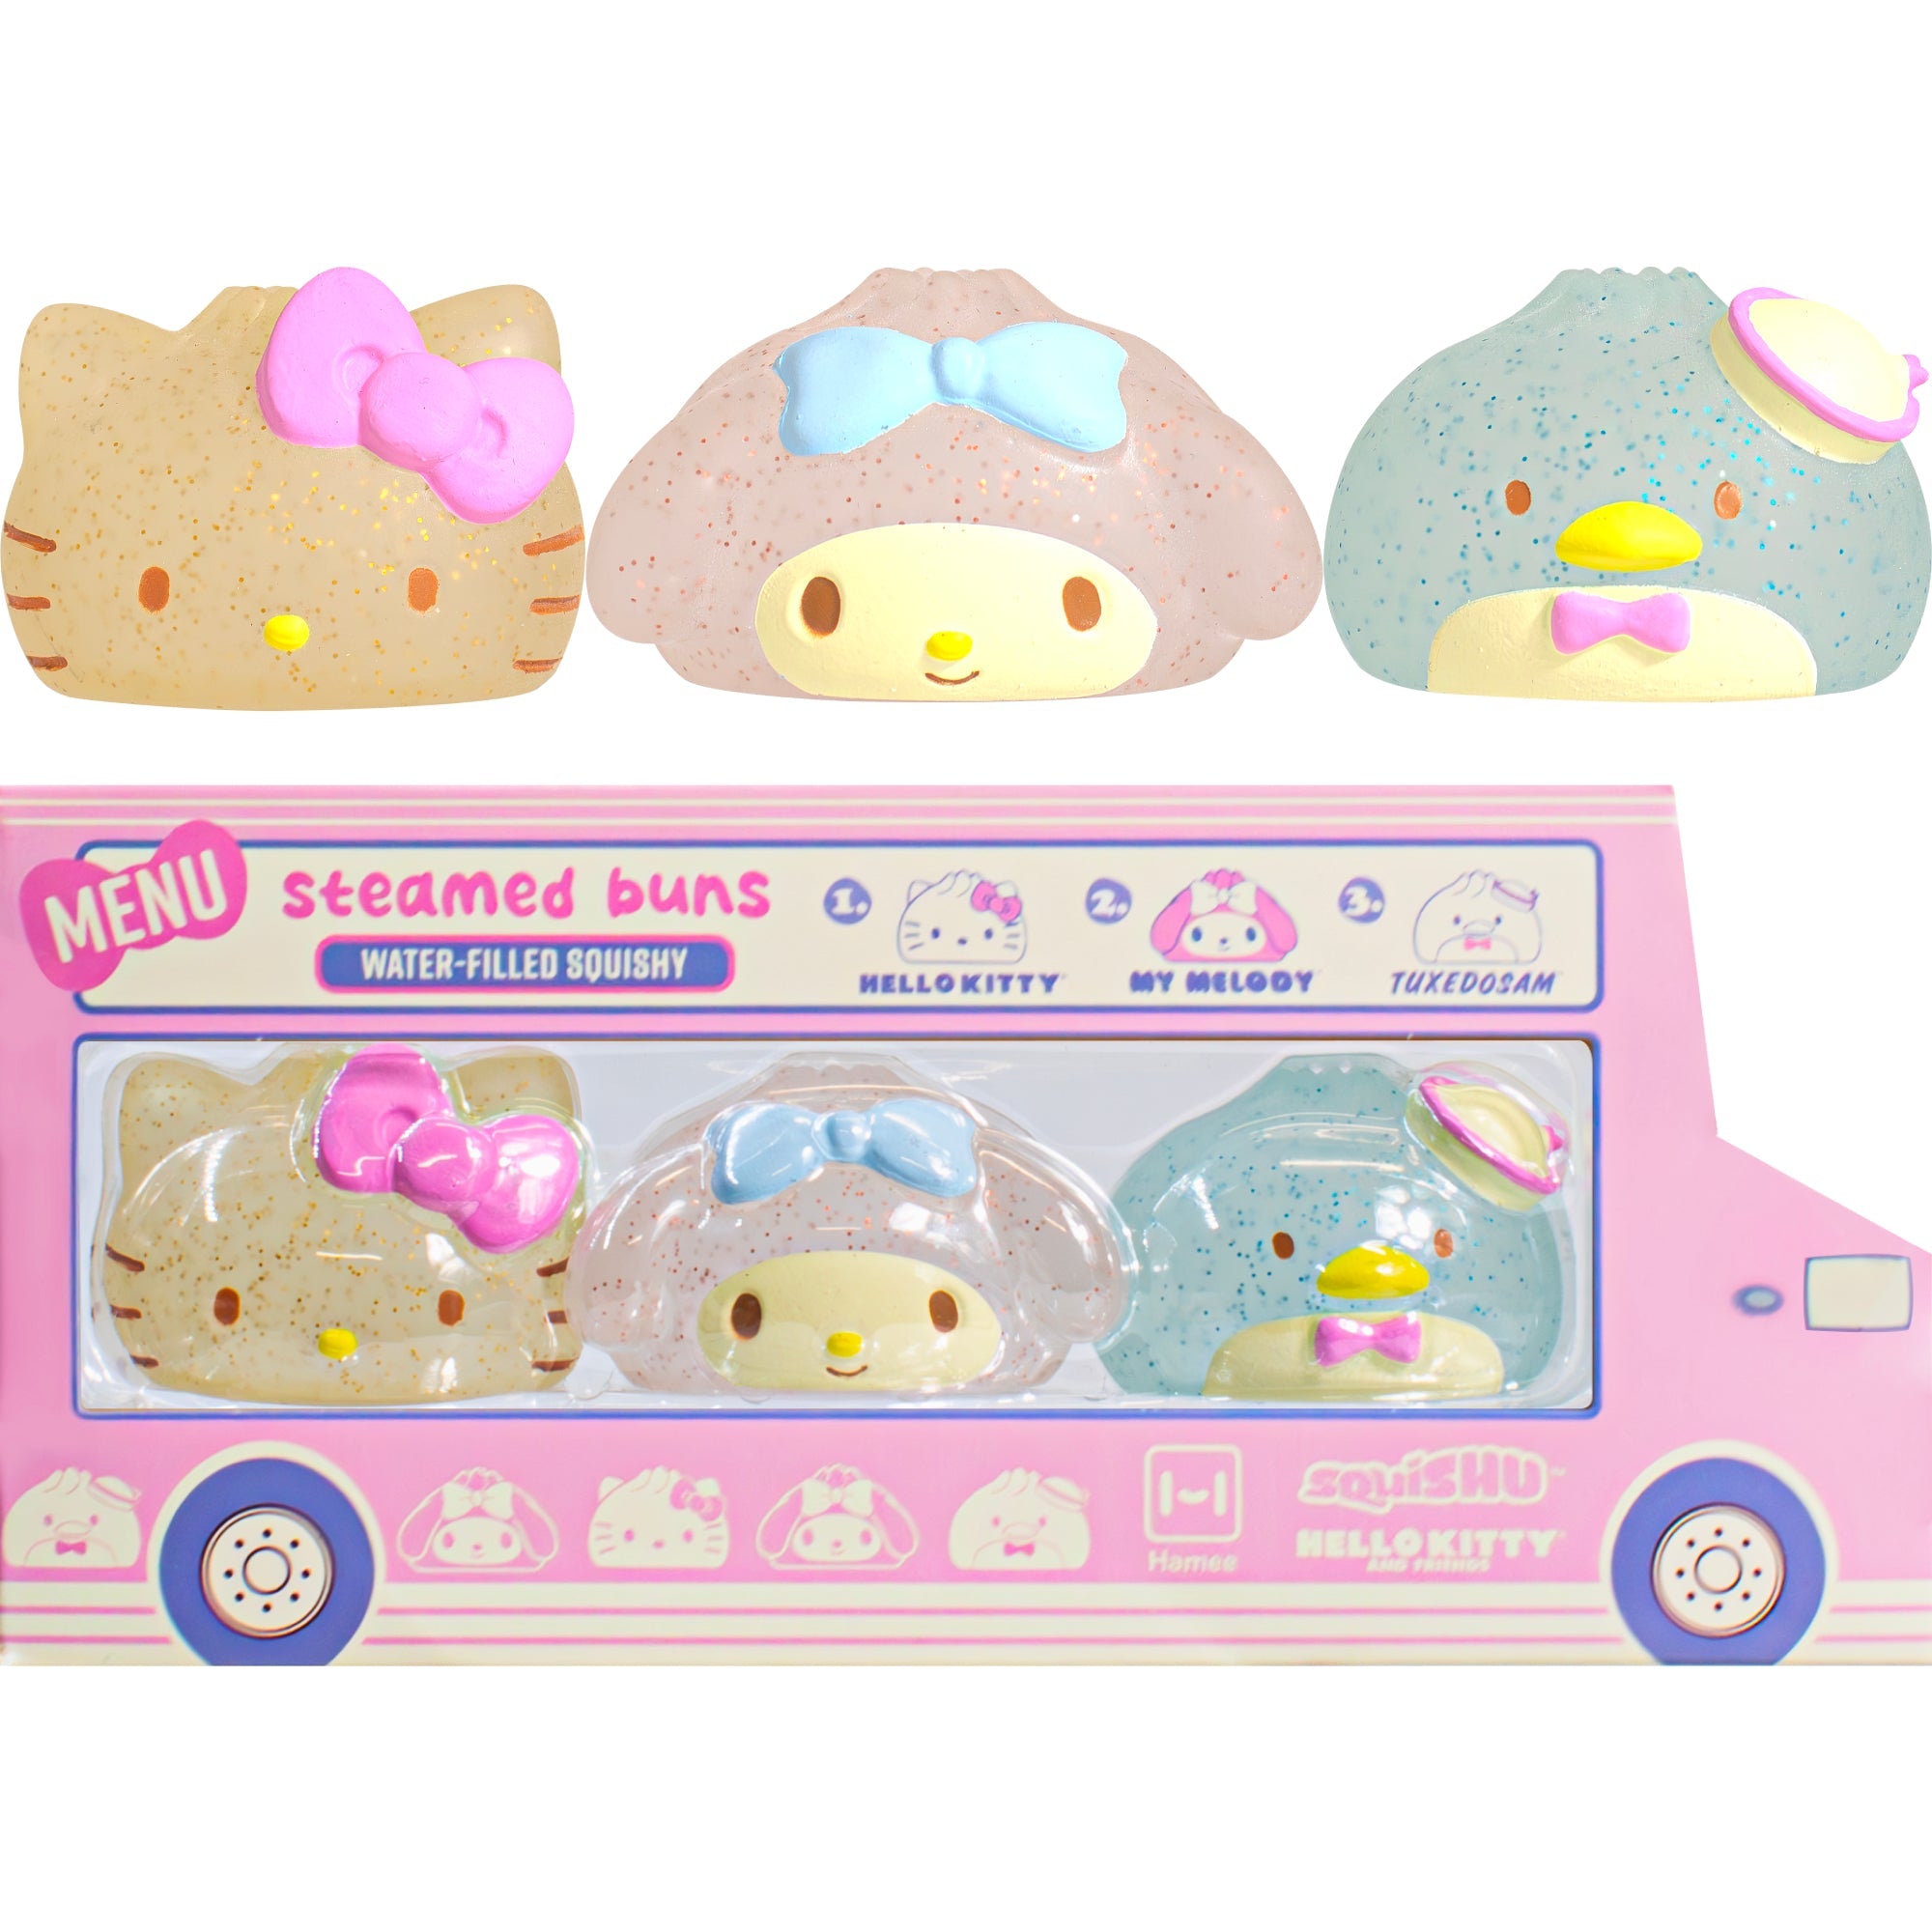 Hello Kitty and Friends Steamed Bun Squishy 3-pc Gift Set Squishy Hamee.com - Hamee US   